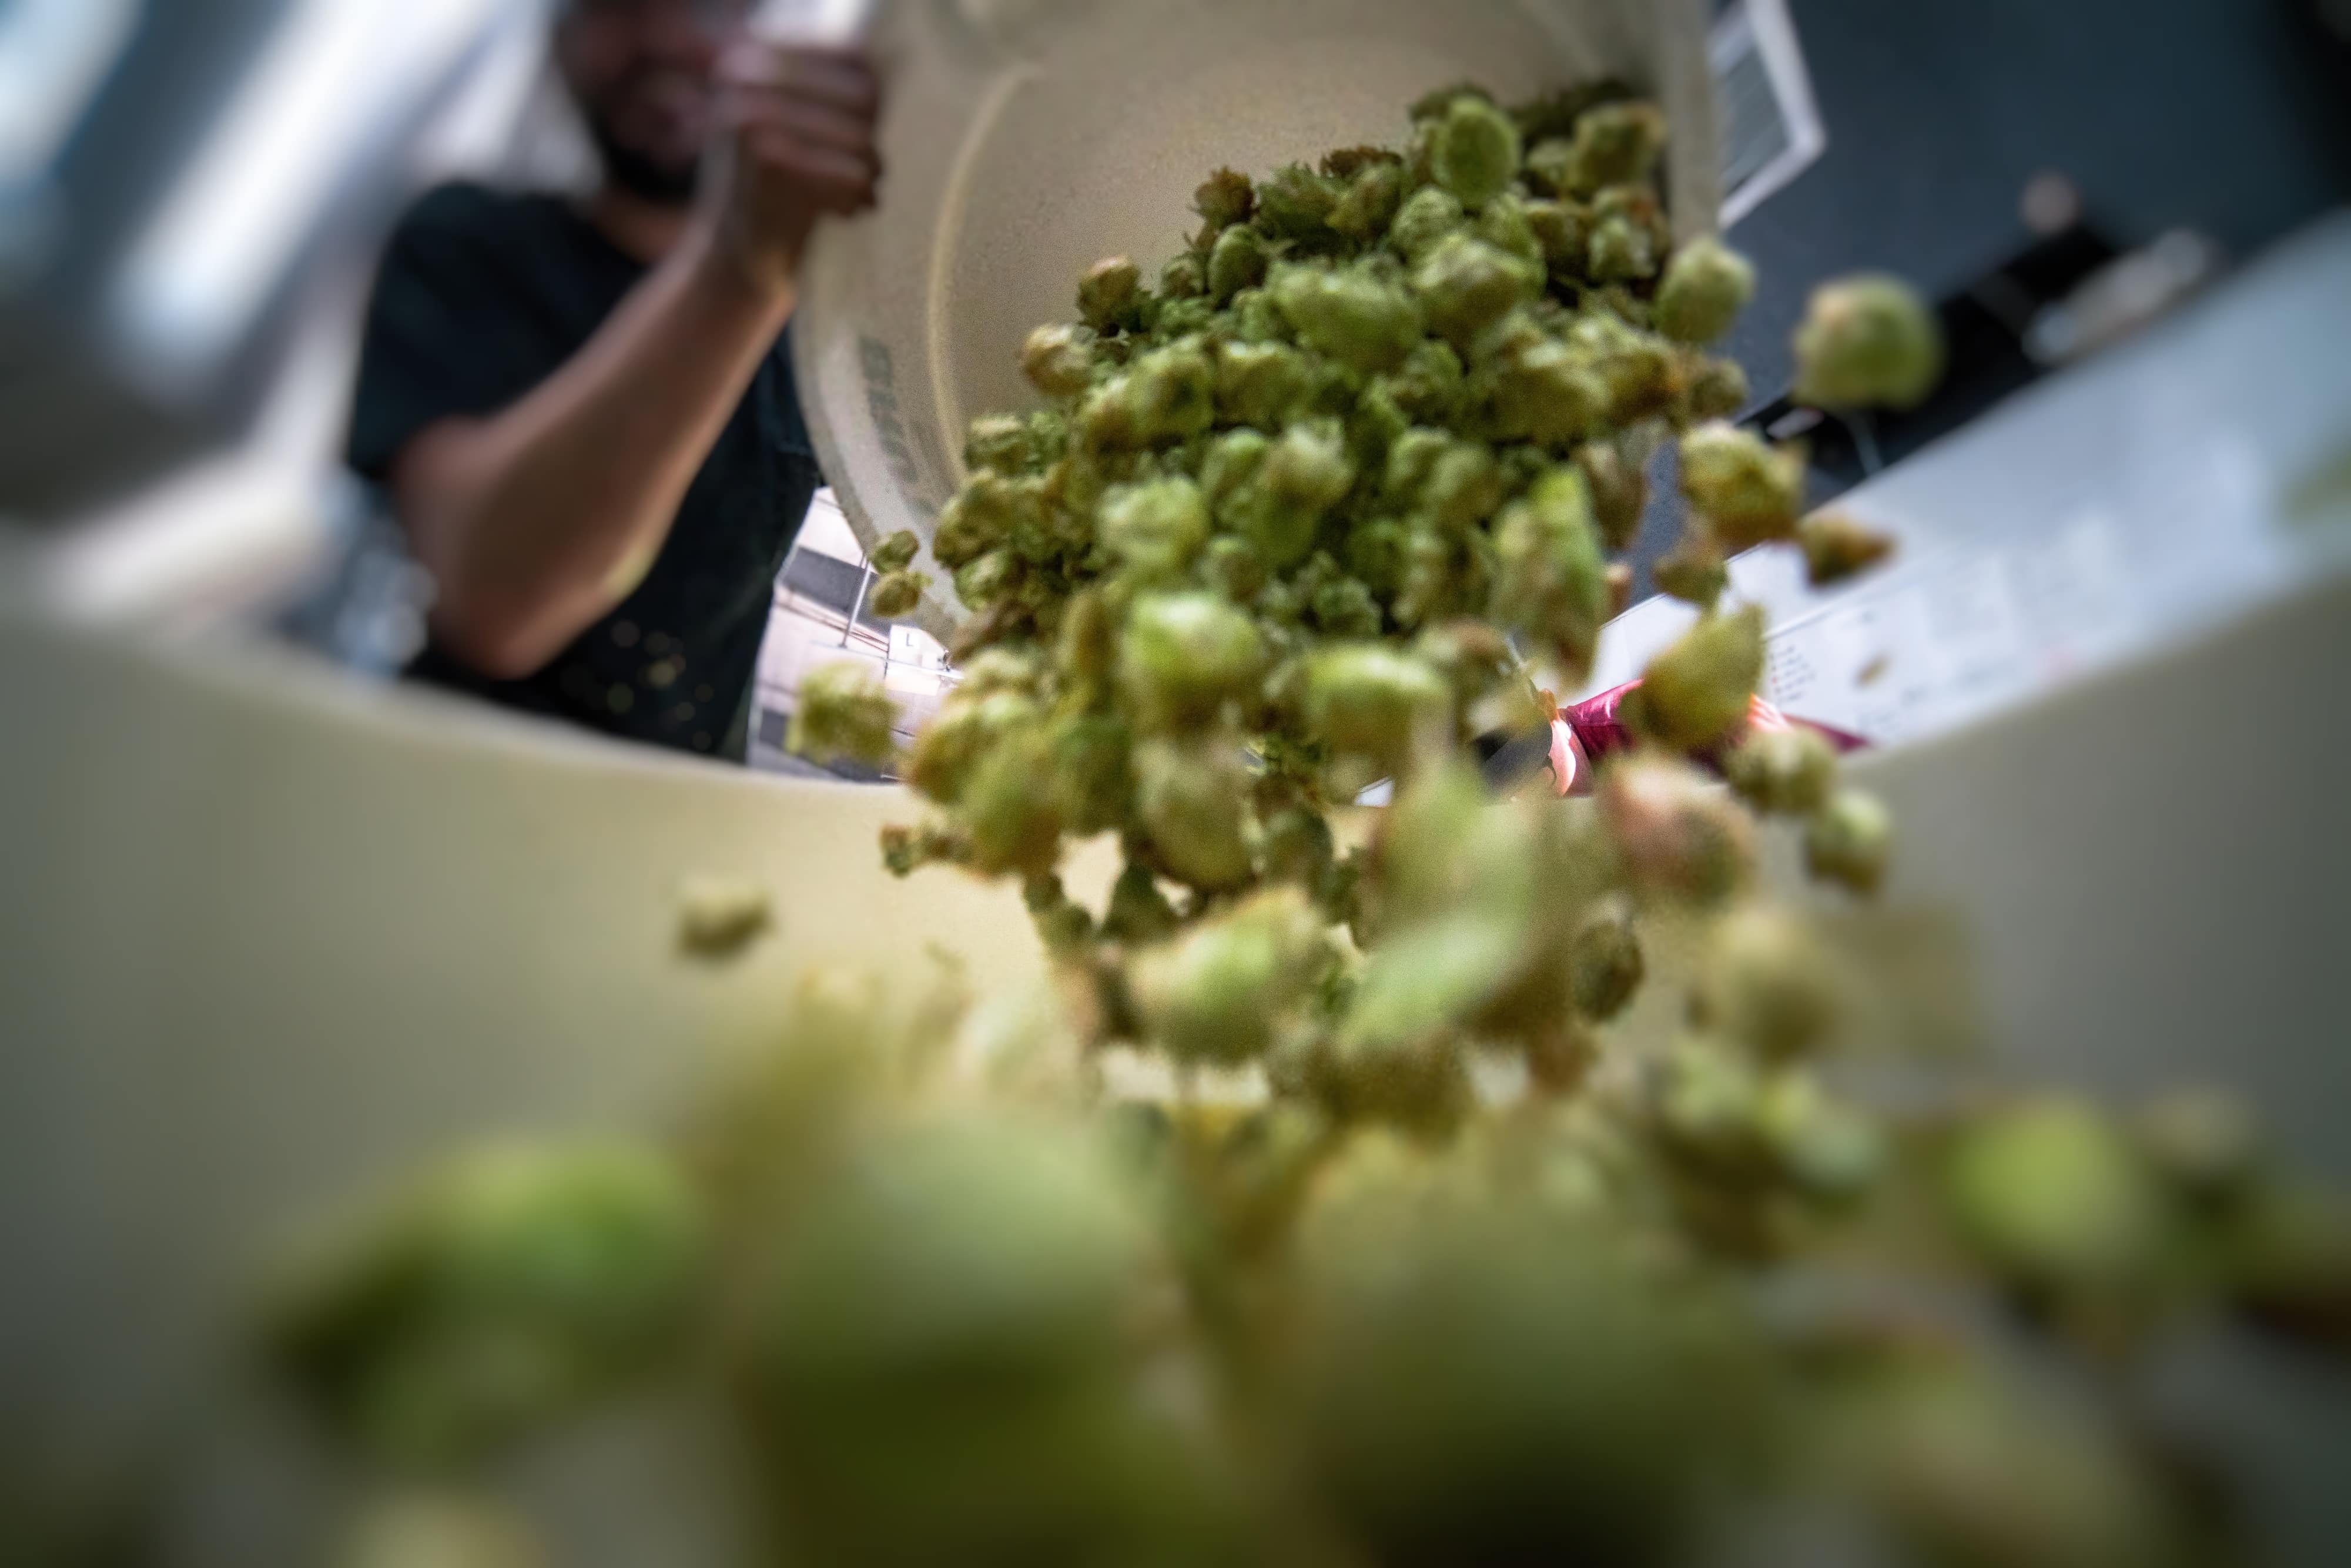 Blurred background, man dumping brussel sprouts down at camera. Camera vantage point looking up at brussel sprouts falling down.